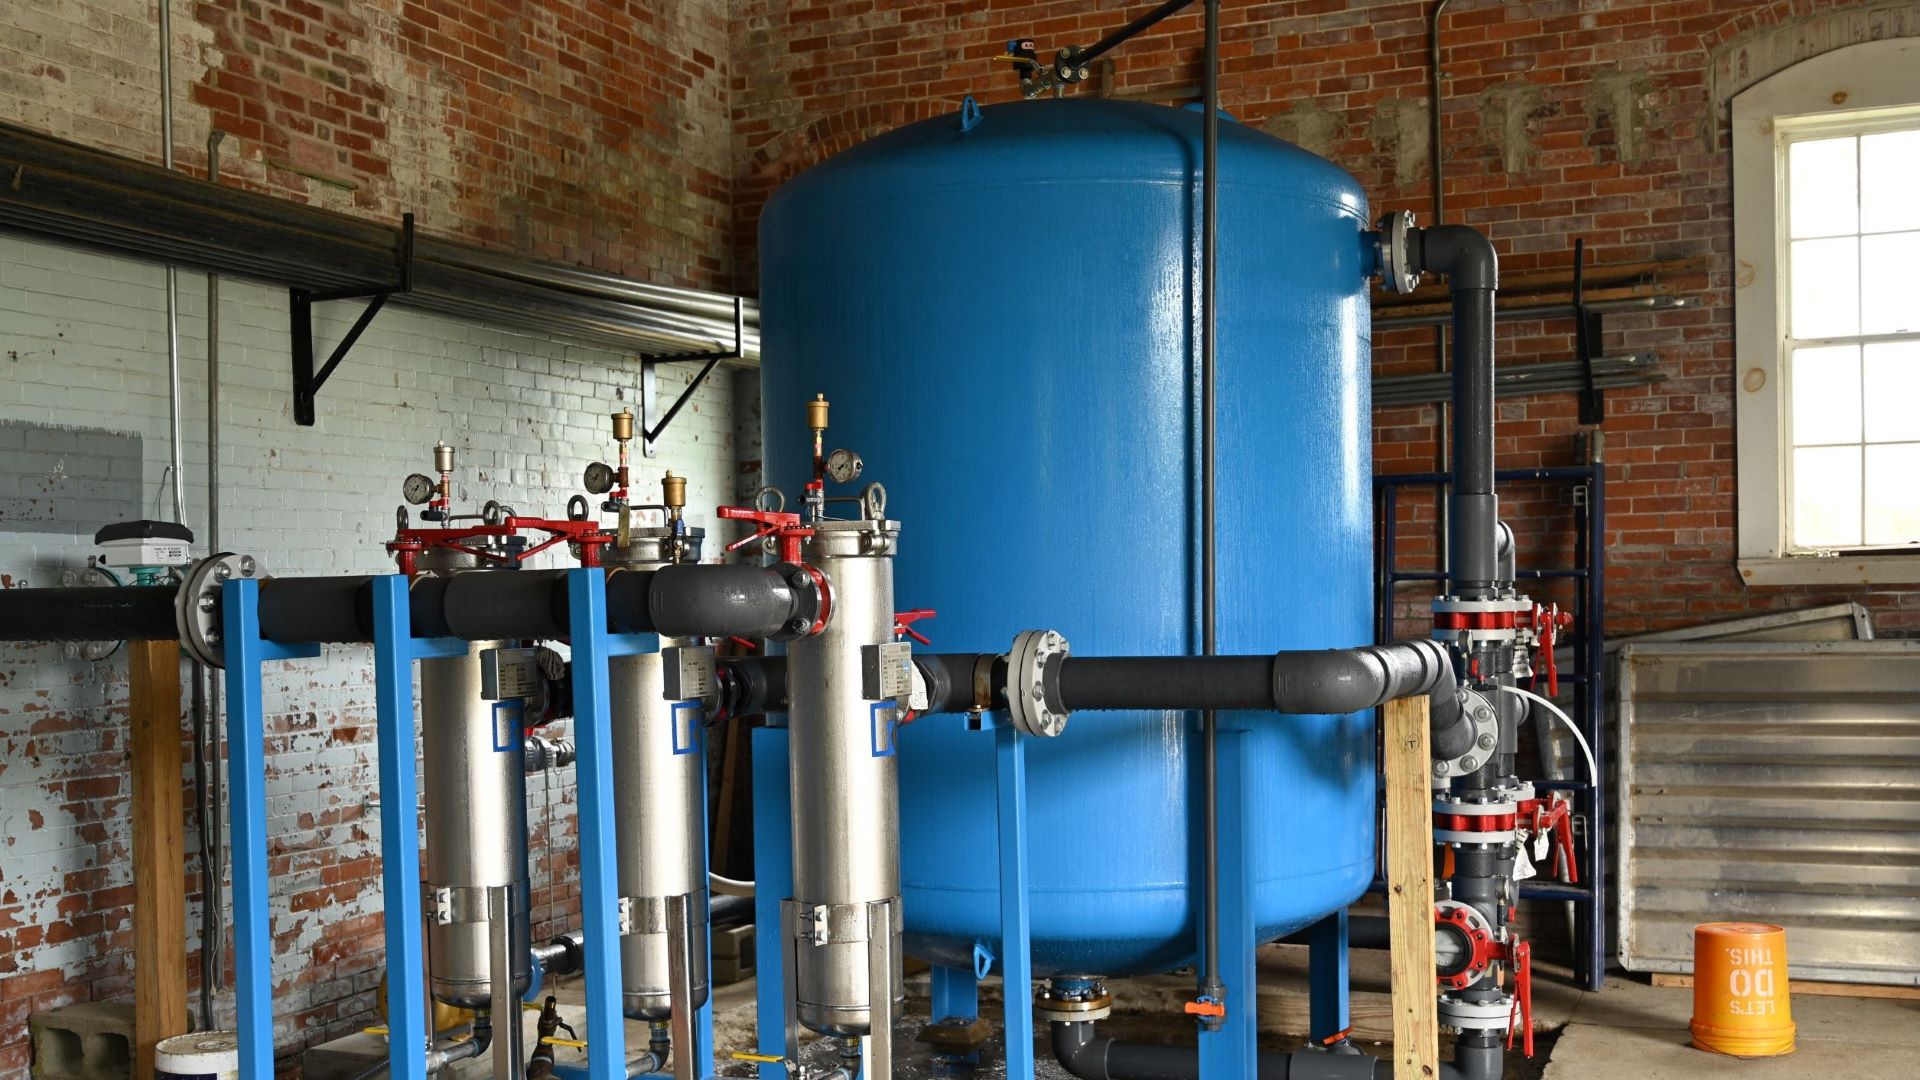 A water treatment mechanism inside the plant.